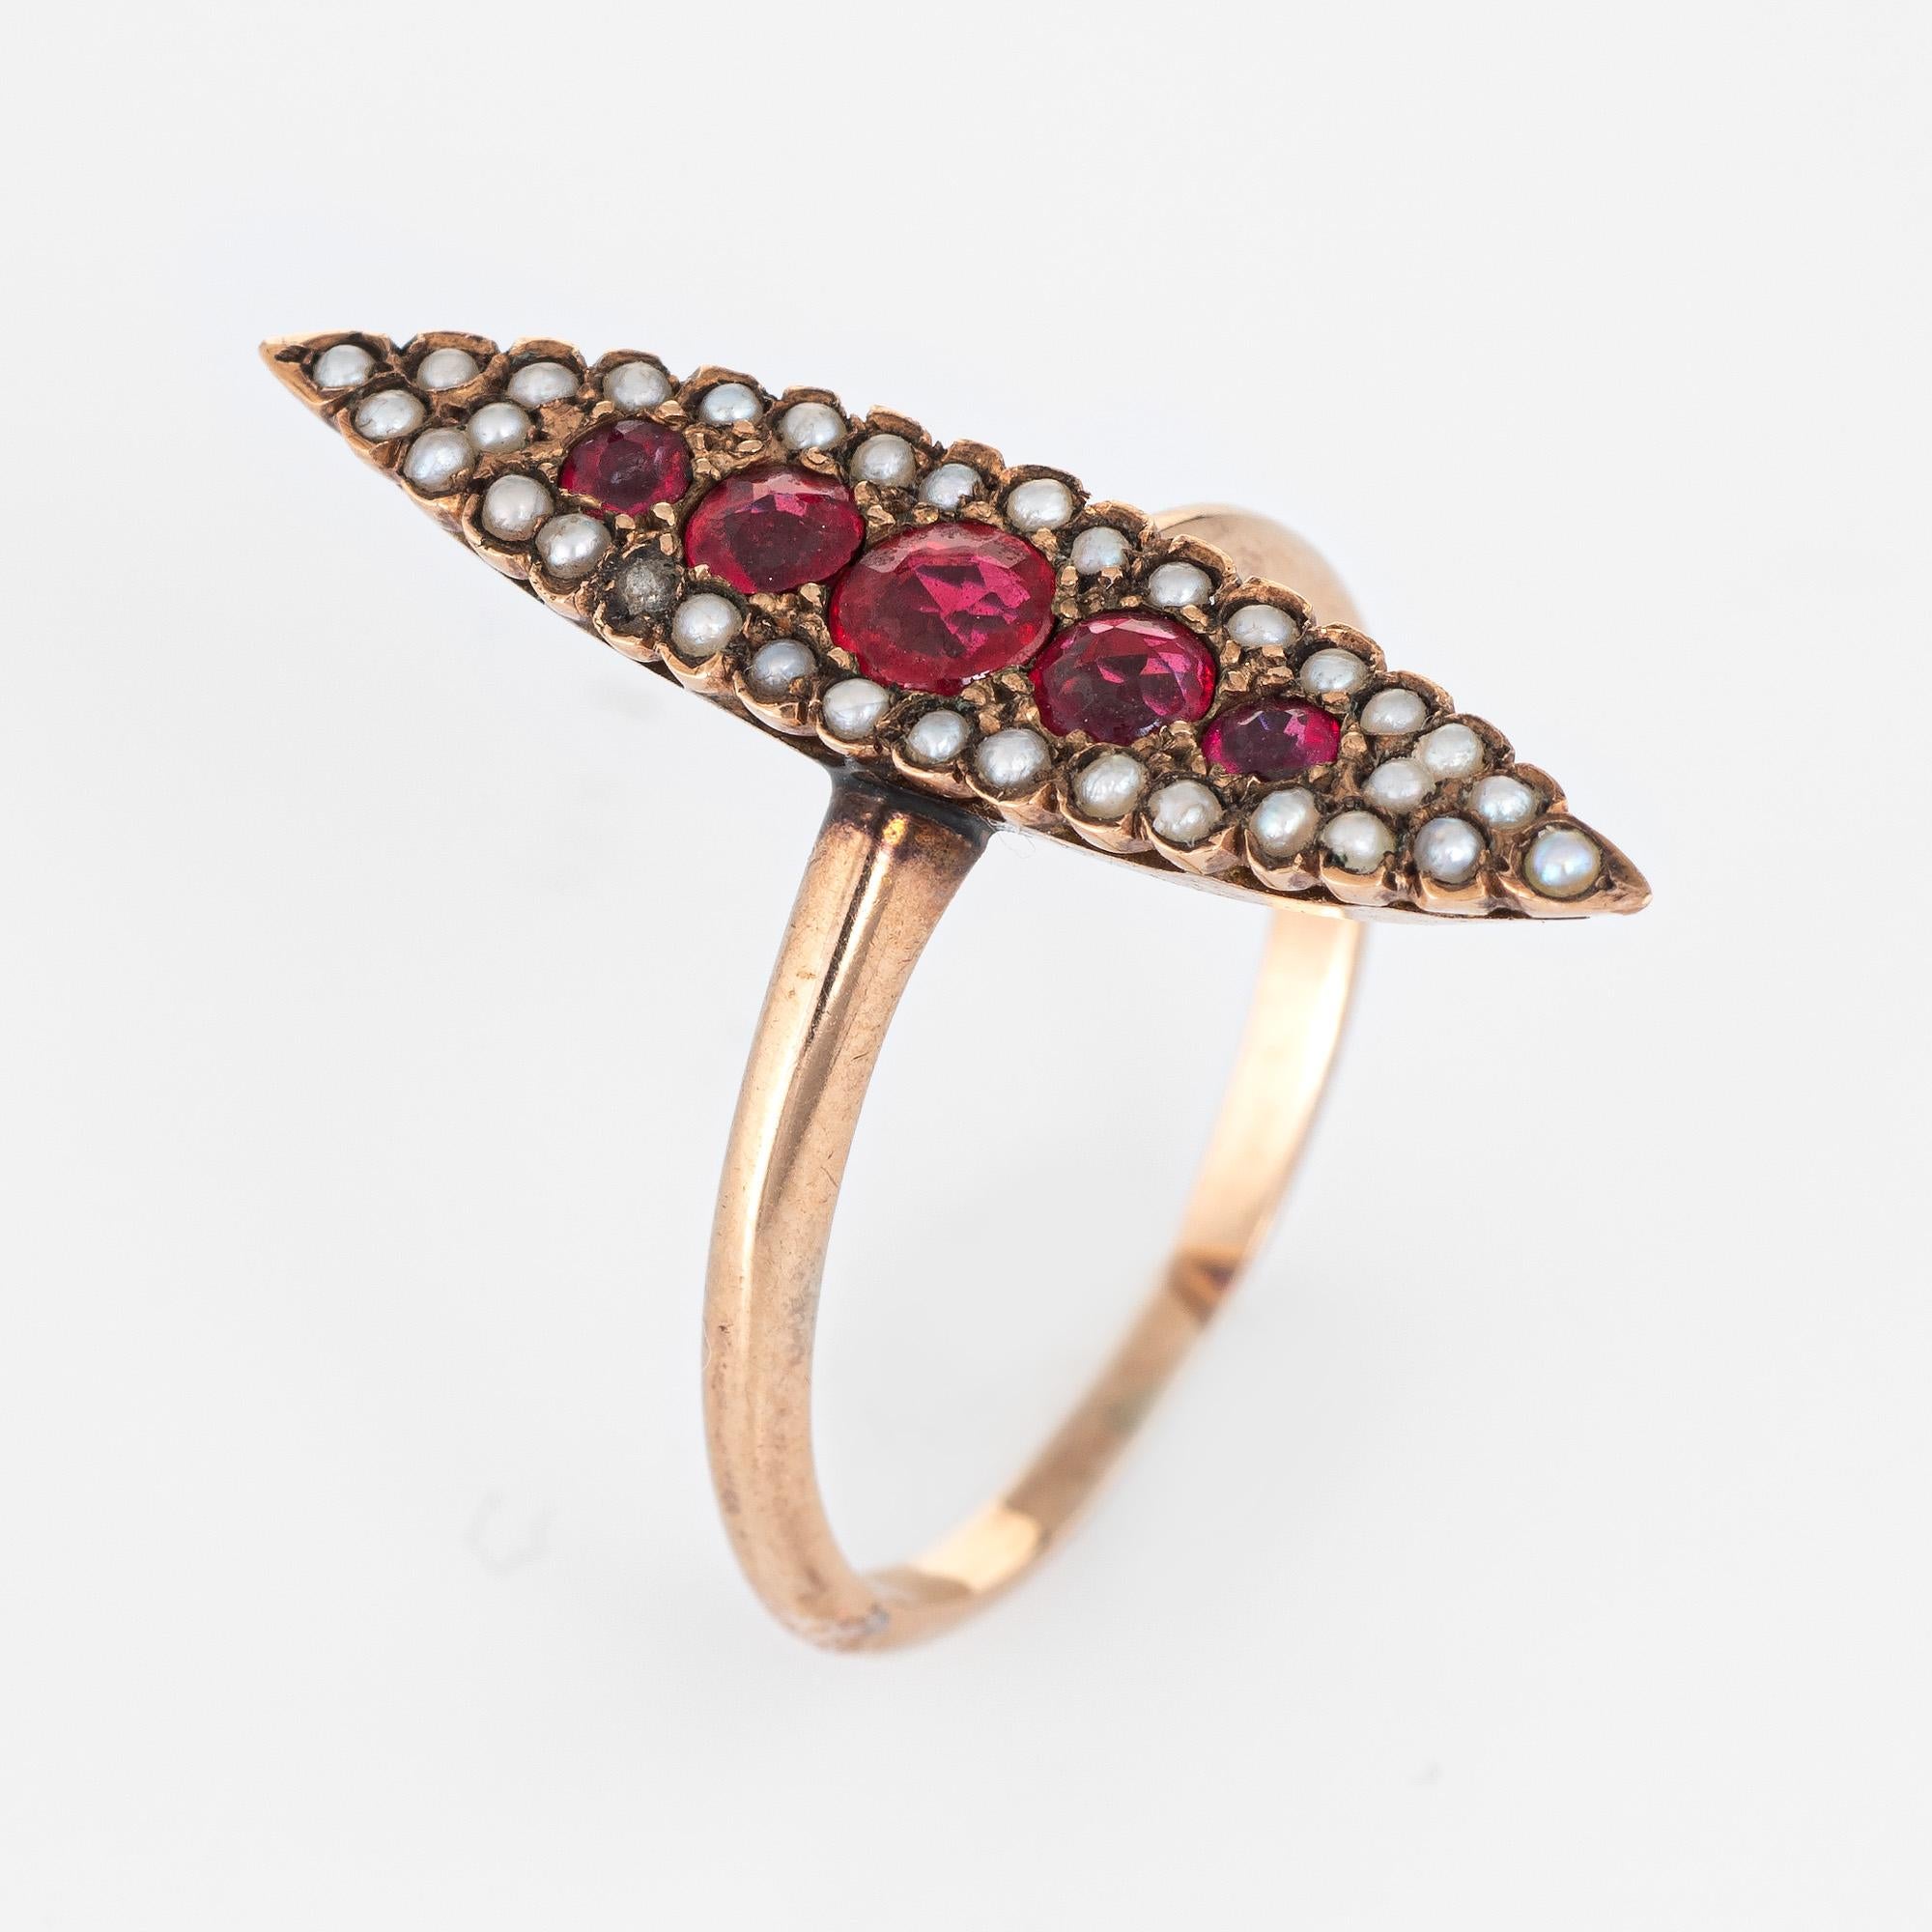 Finely detailed antique Victorian era ring (circa 1880s to 1900s) crafted in 14k yellow gold. 

Ruby doublets range in size from 0.03 to 0.10 carats. The seed pearls measure (average) 1mm. Note: light surface abrasions to the rubies.  

A center set